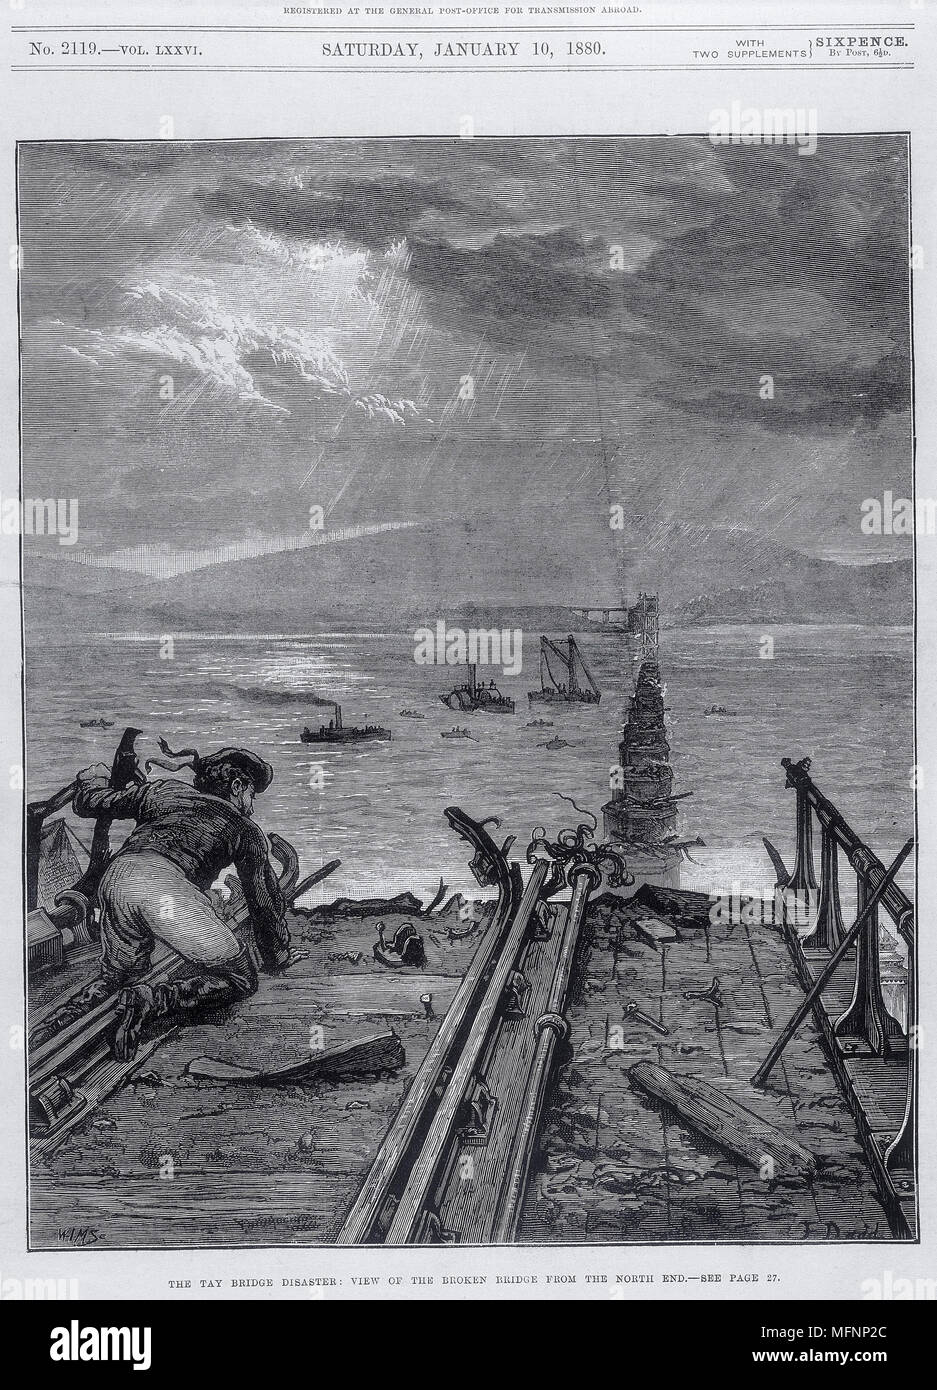 Tay Bridge disaster,  28 December 1779. View of broken bridge from north end. Engraving from 'The Illustrated London News', 1879. Stock Photo